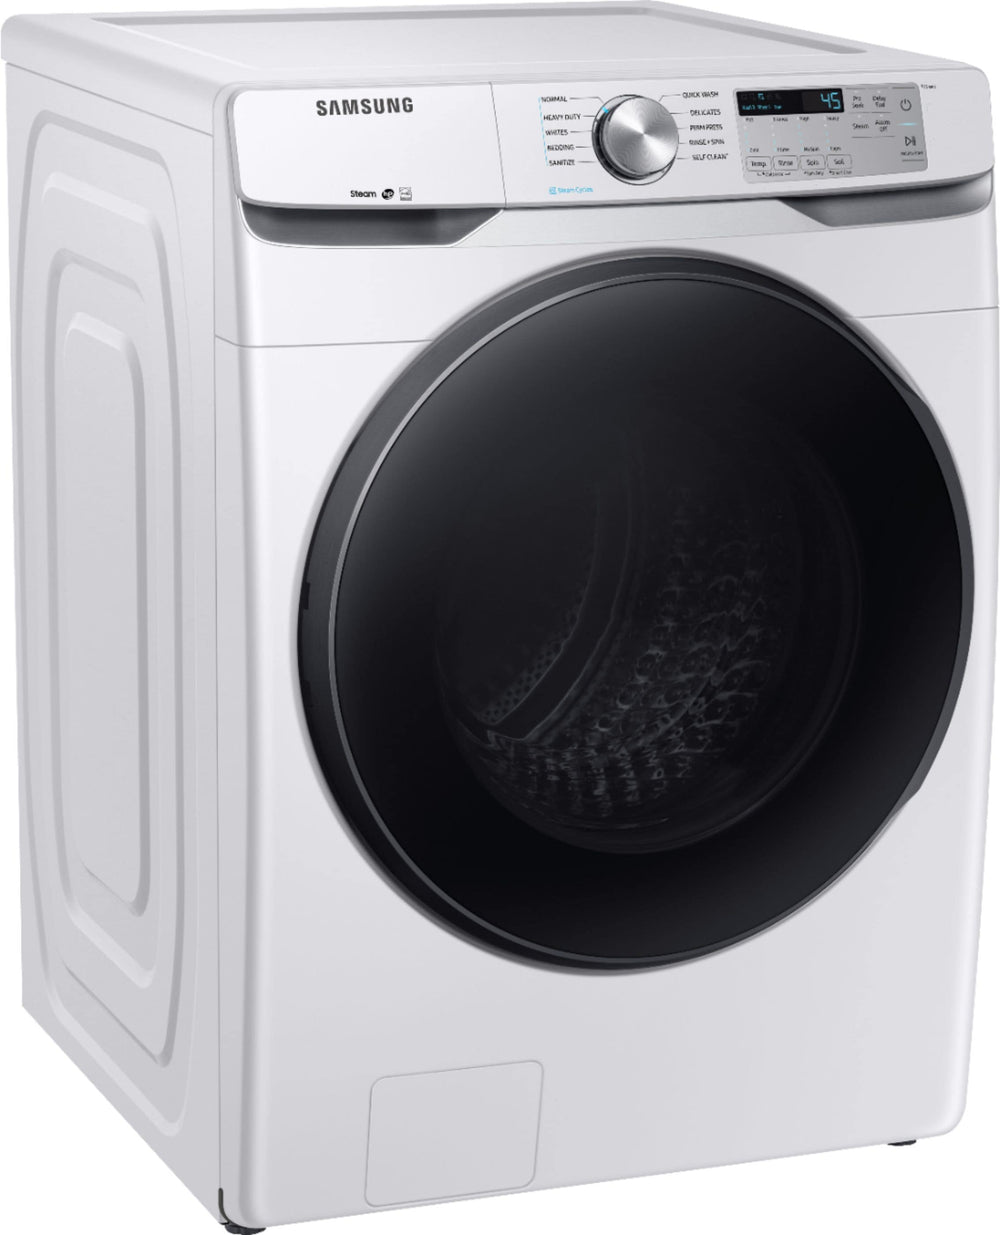 Samsung - 4.5 cu. ft. High Efficiency Stackable Front Load Washer with Steam - White_1